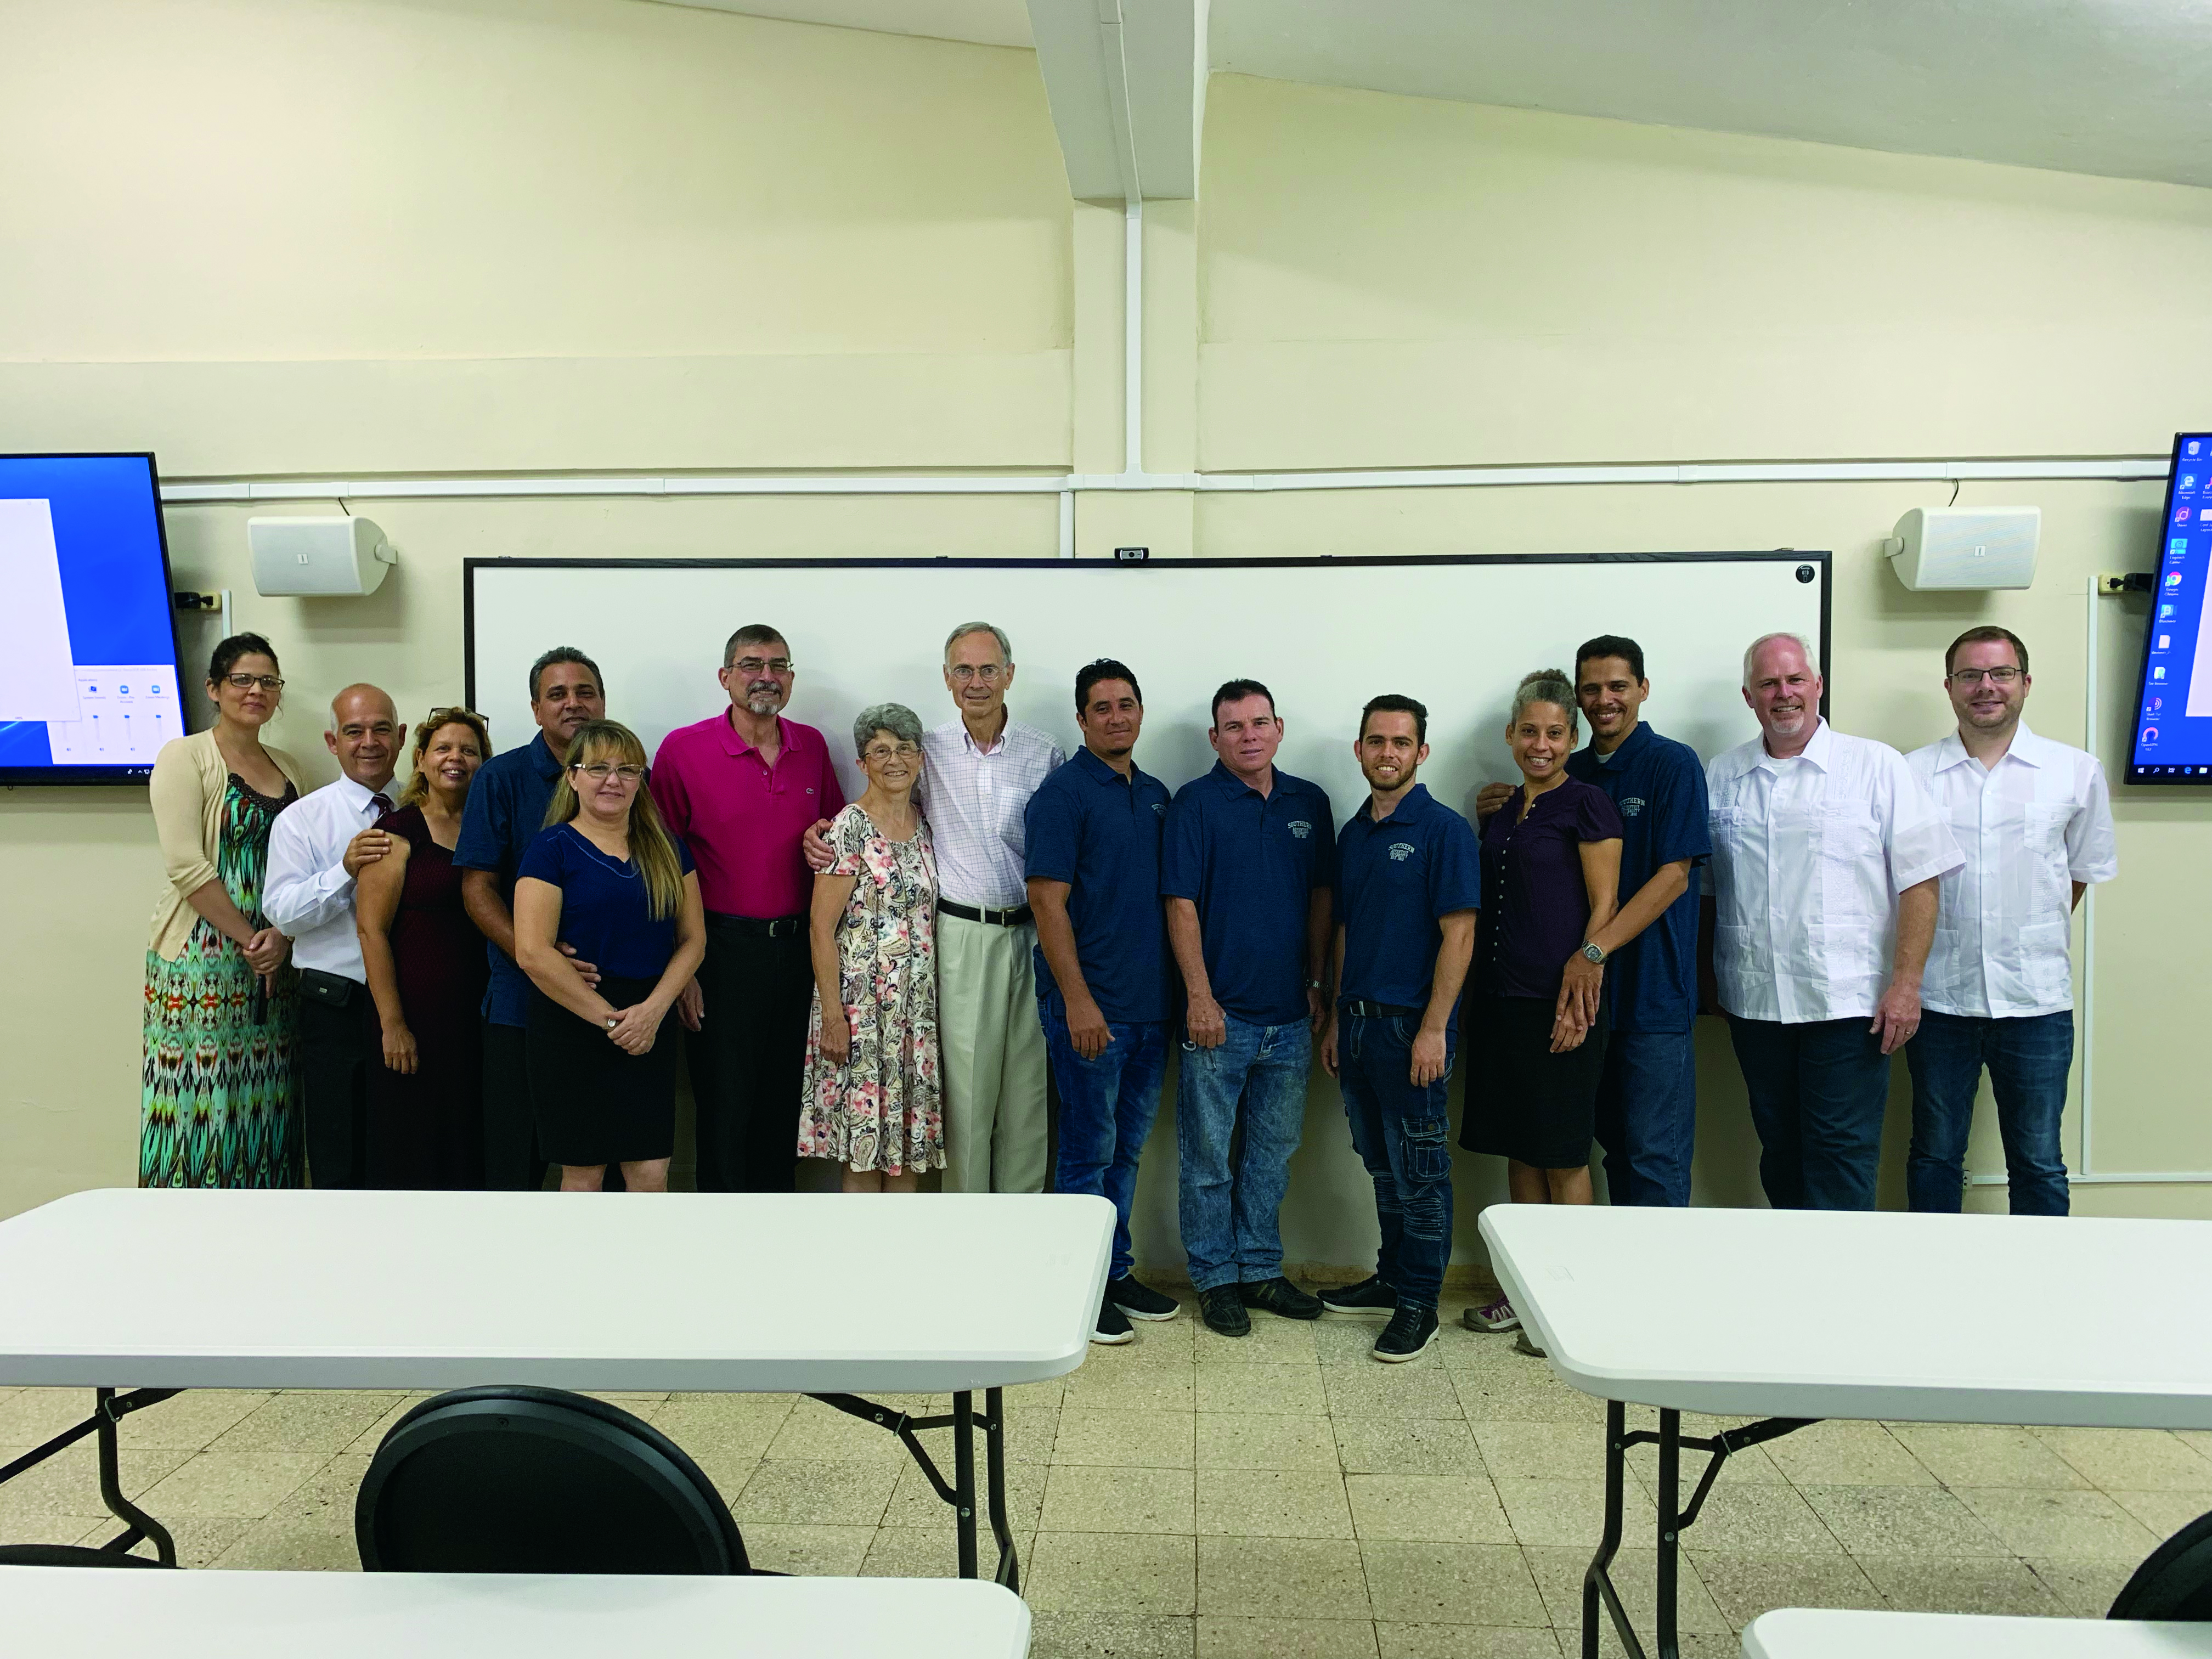 Personnel from Southern Adventist University and the Cuba Adventist Theological Seminary pose for a photo in the former storage room that was turned into a virtual classroom.